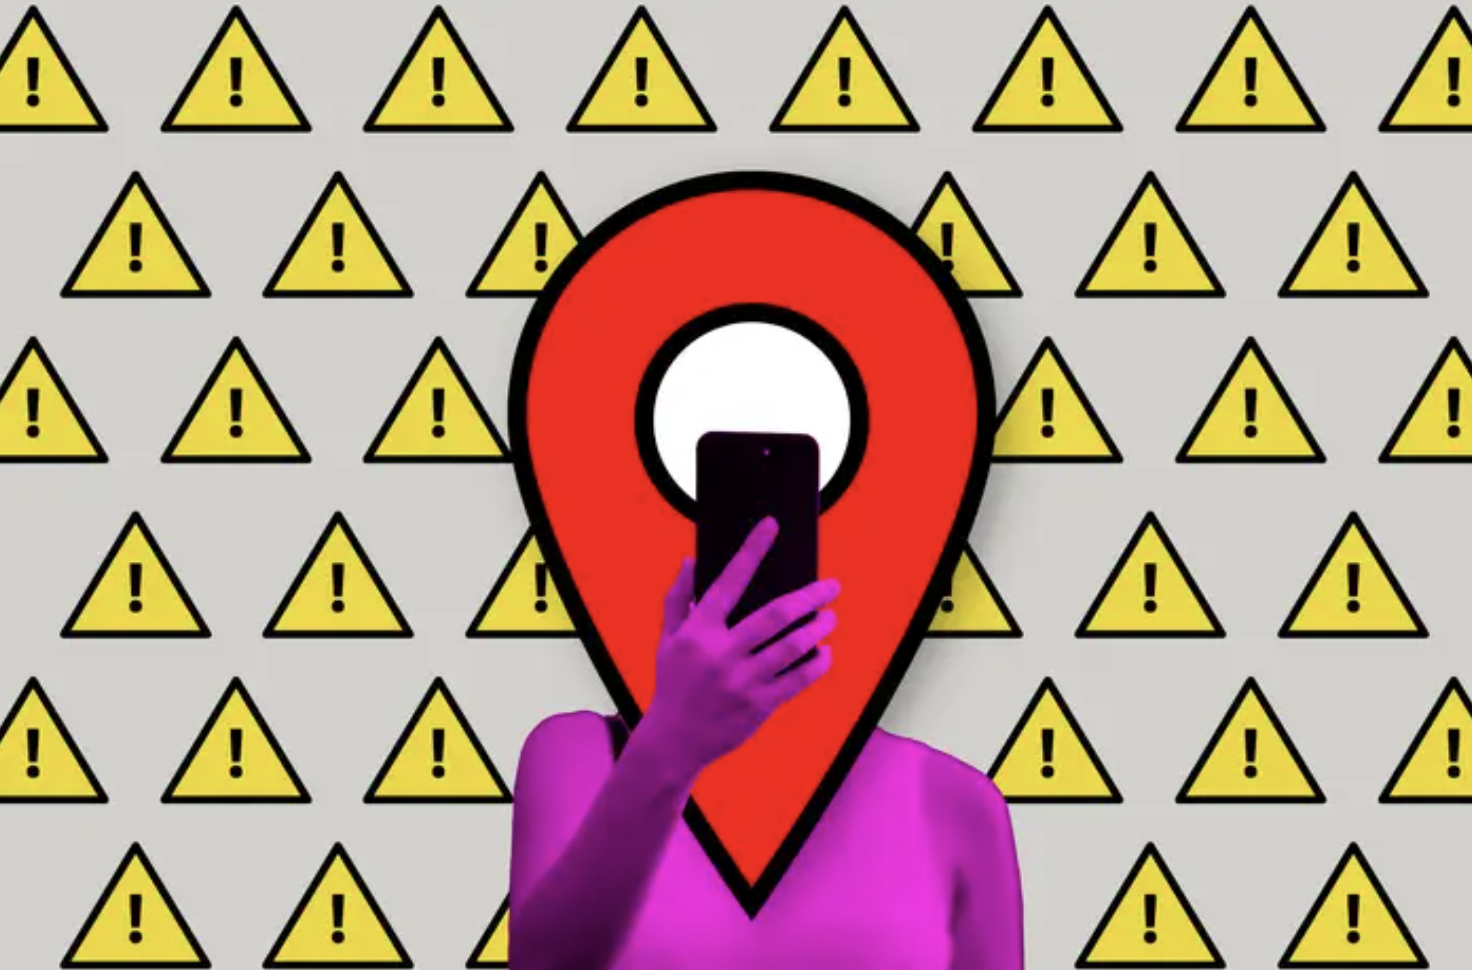 someone with a location icon for a face taking a selfie, in the background are a pattern of yellow triangles with exclamation points